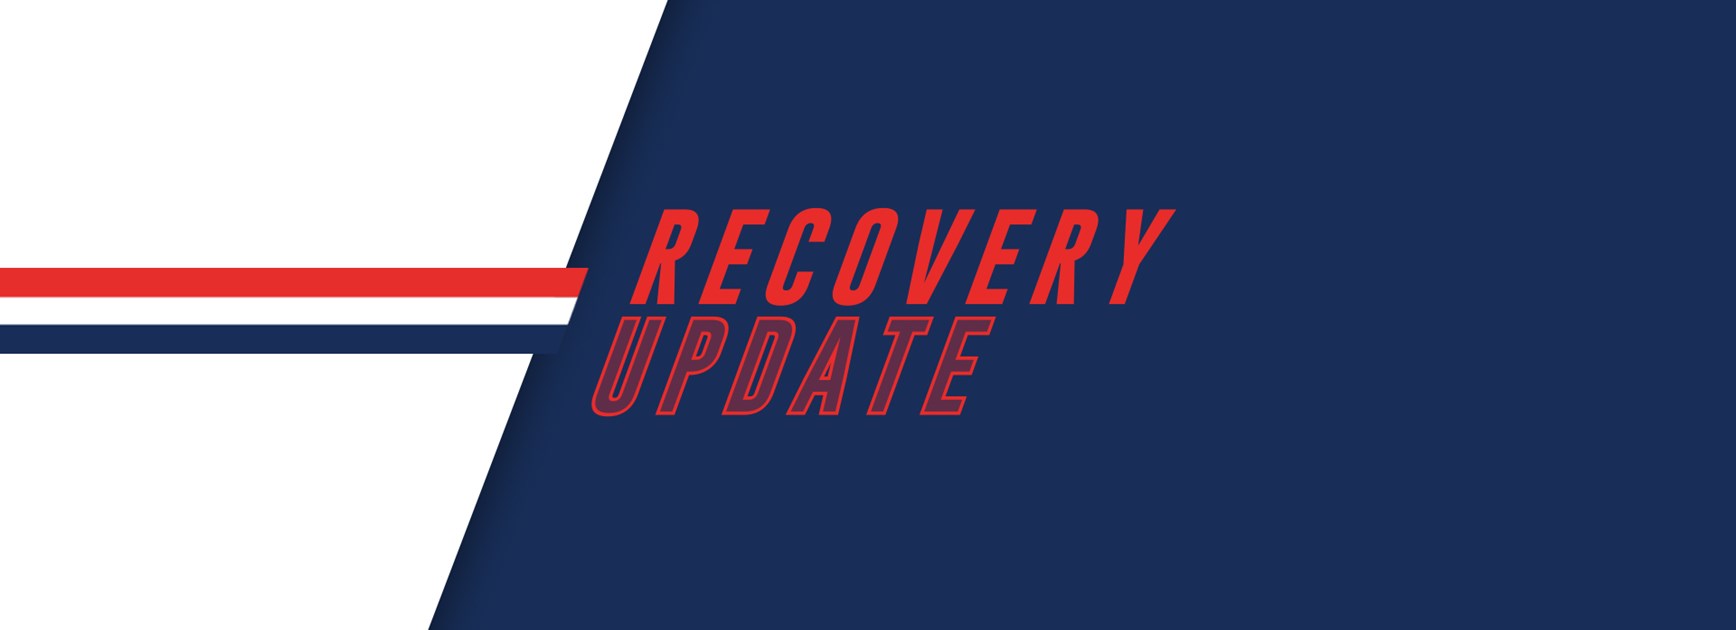 Recovery Update Round 24